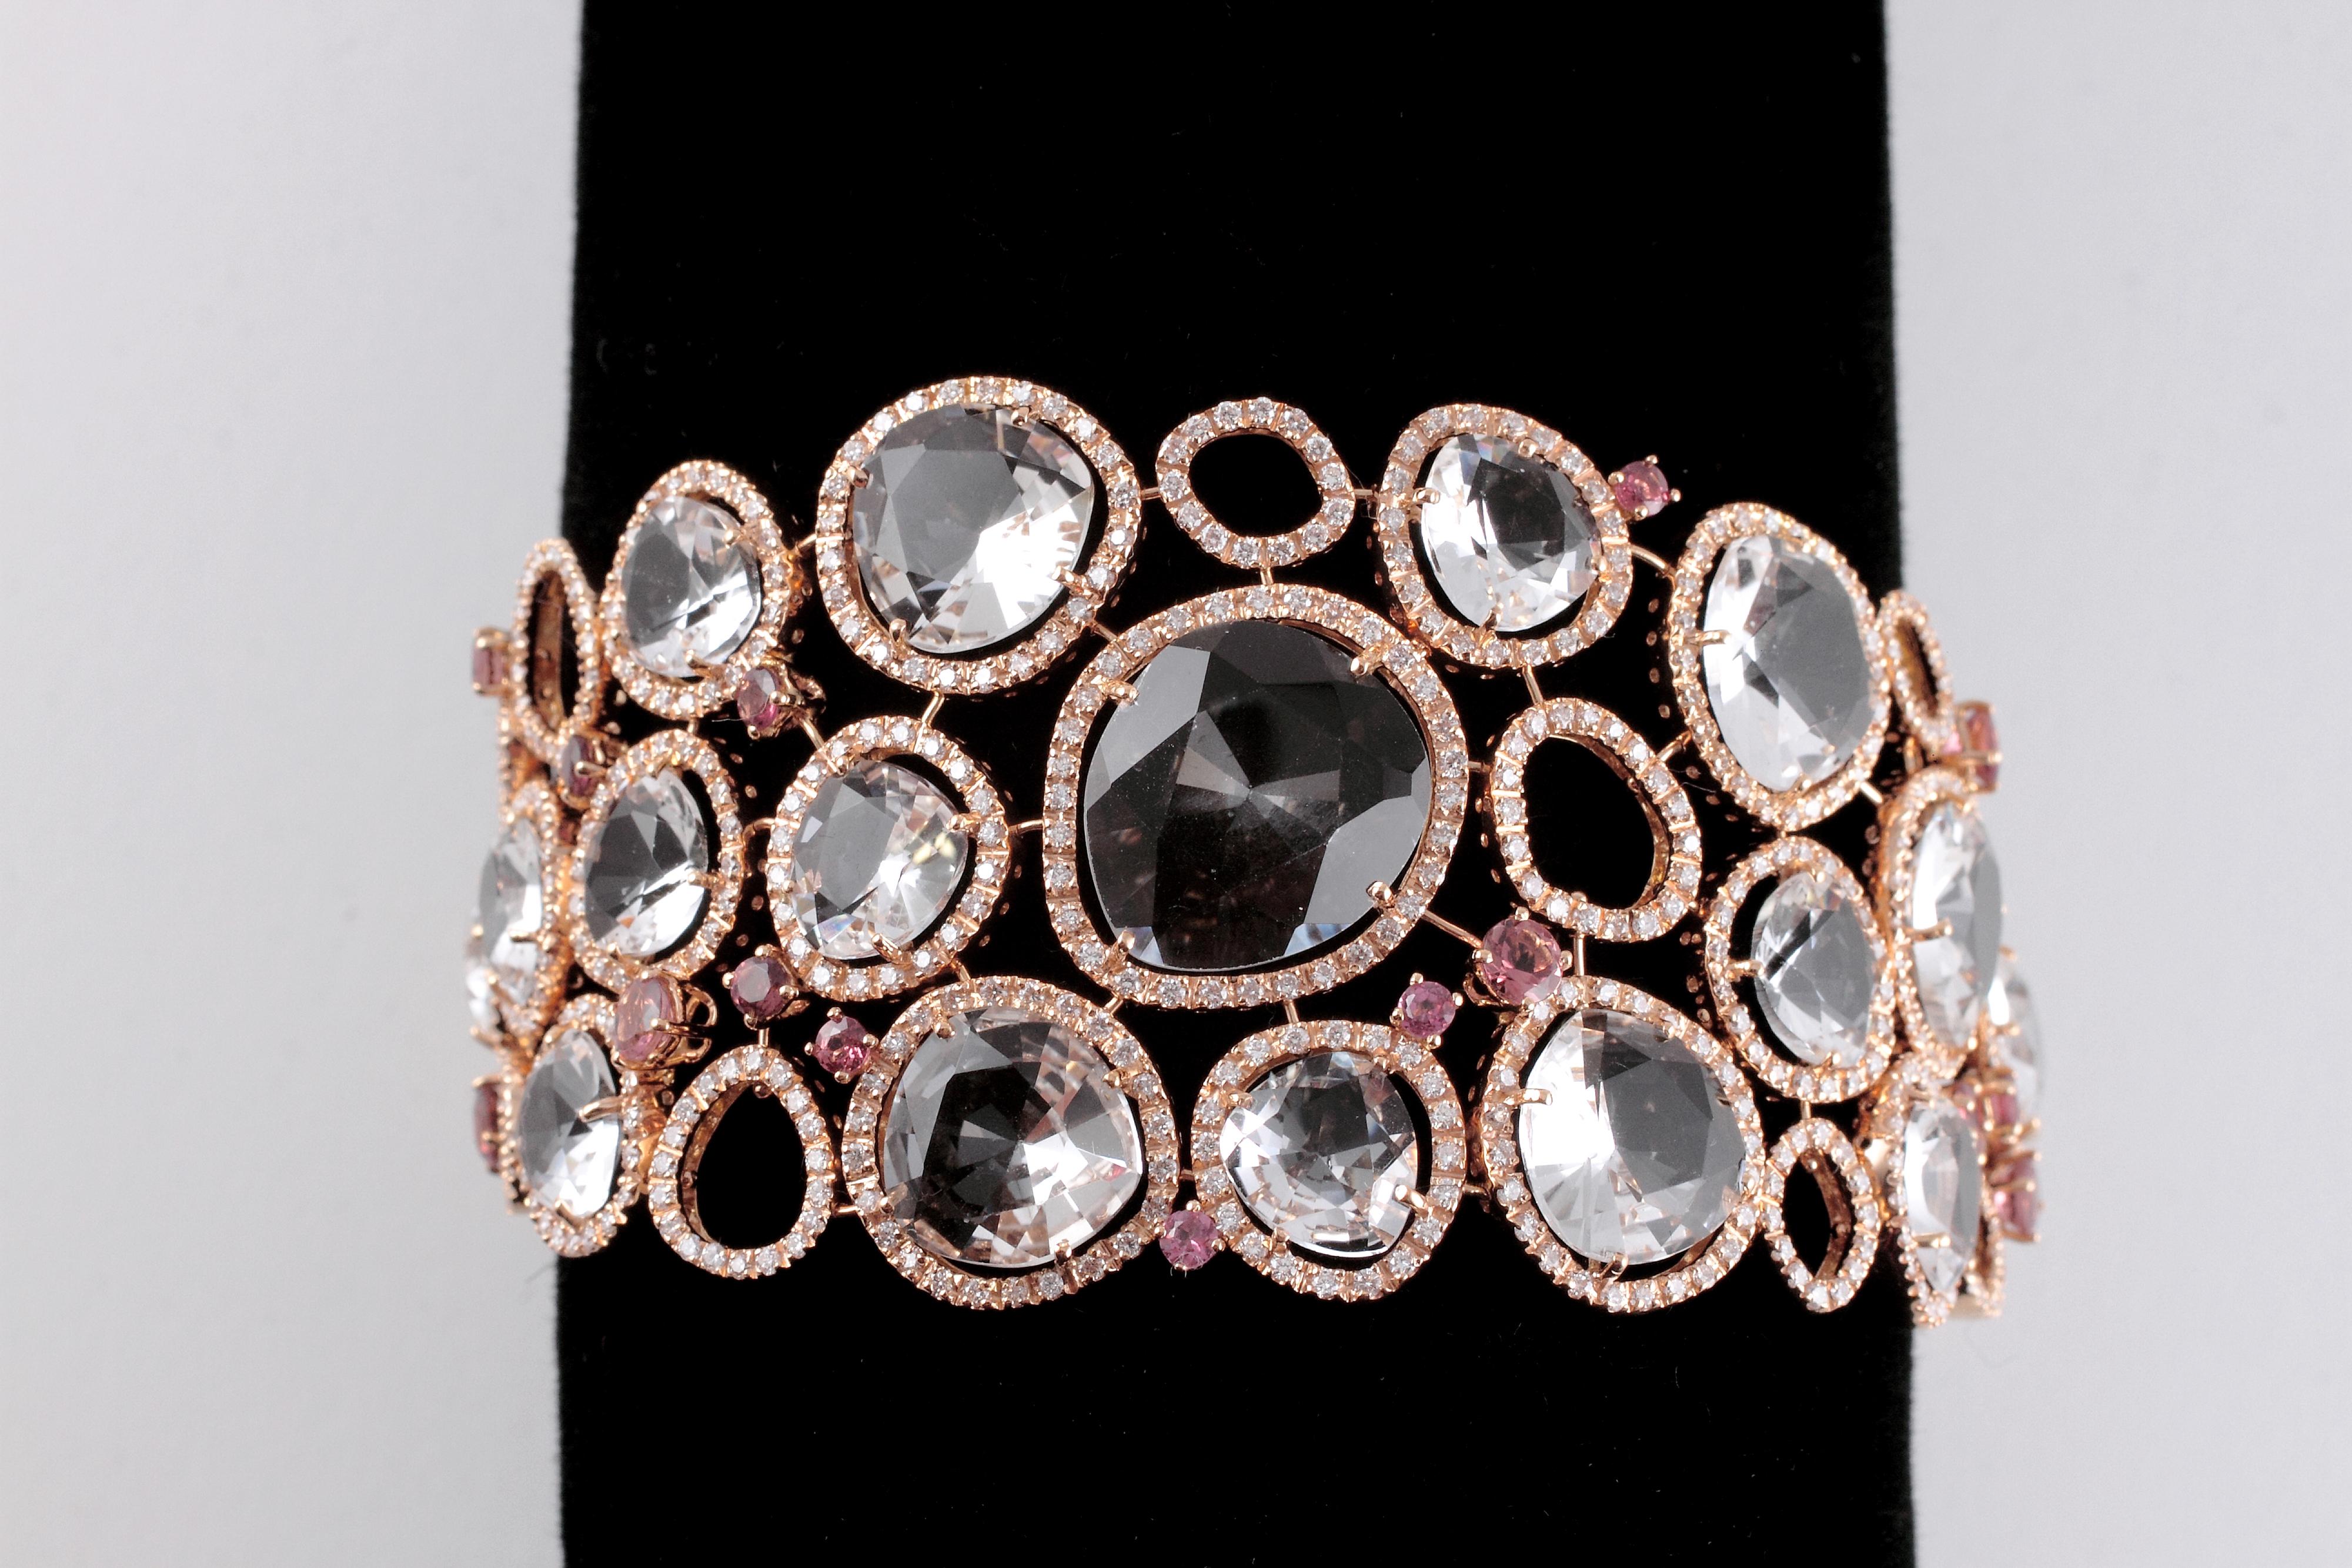 From famed London designer, David Morris, this stunning bracelet is in 18 karat rose gold and supports 5.53 carats of diamonds as trim, 53.50 carats of multi-shaped quartz and 2.50 carats of popping pink tourmaline stones! You can wear it tight on